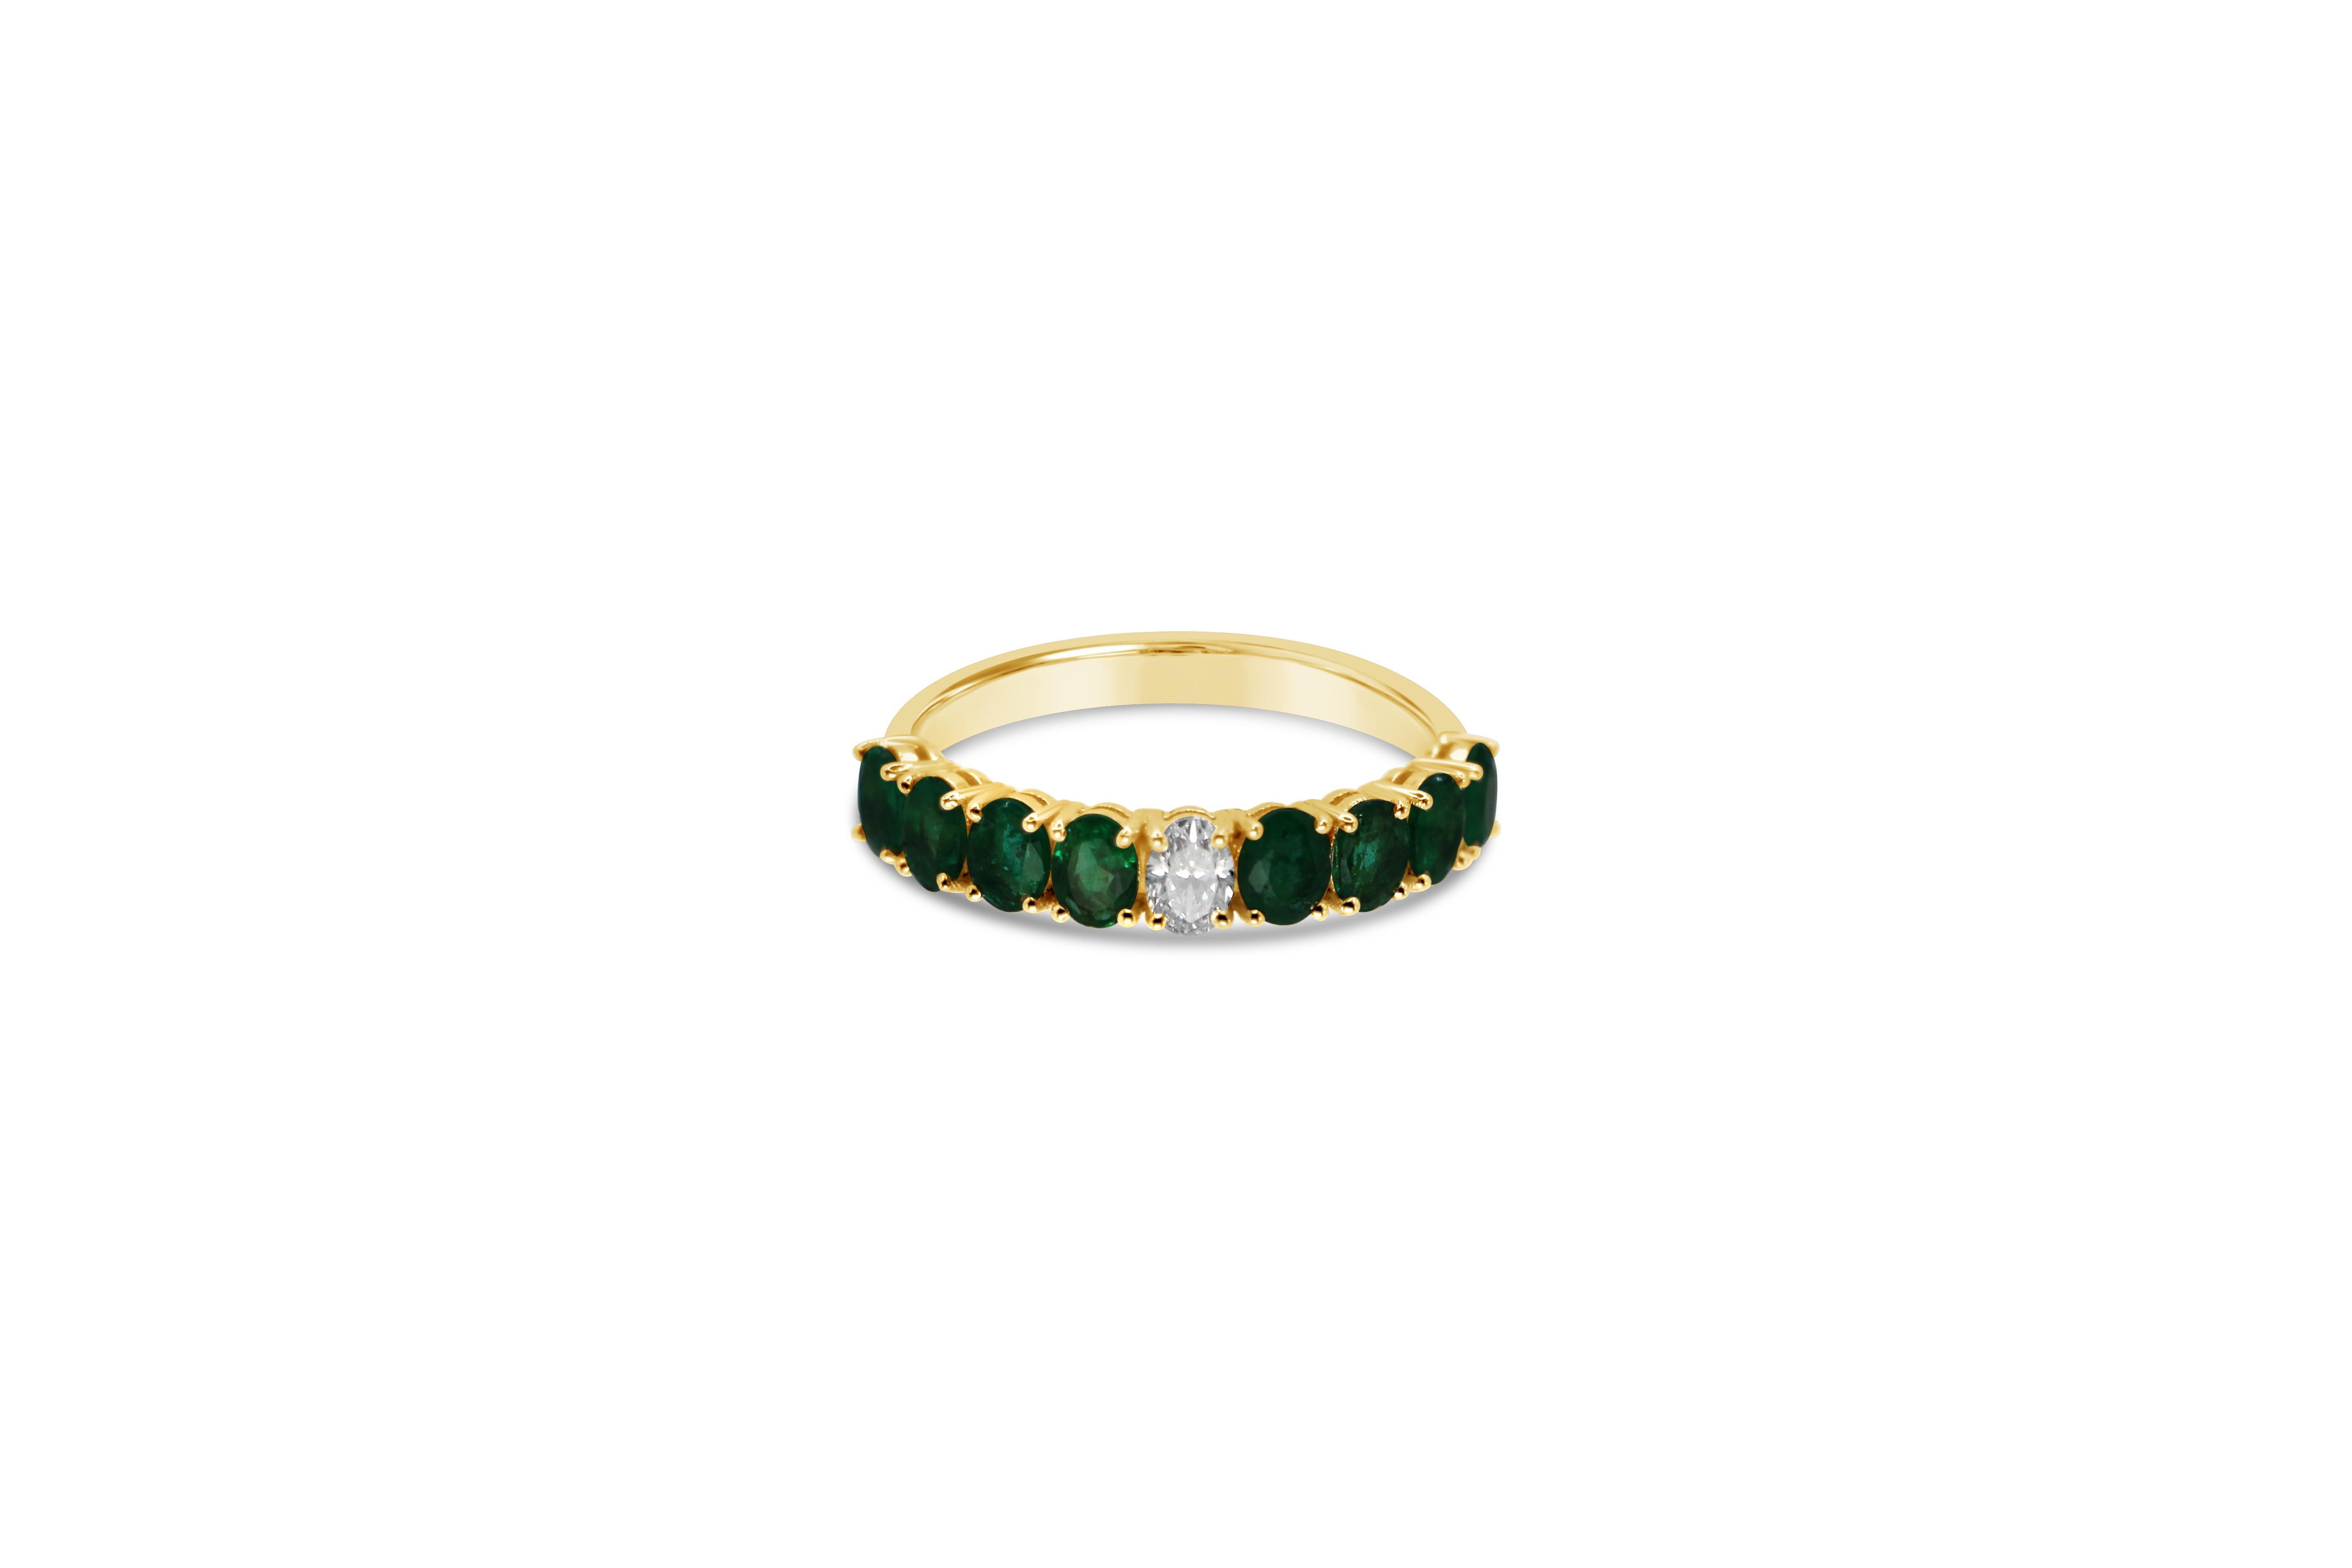 Eternity Ring with Oval Brilliant Cut Green Emeralds and Diamond in 18Kt Yellow Gold. All the stones are set in the prong setting.
The Diamonds is 0.15ct and the beautiful green emeralds are 1.22ct.
A delicate, modern and stylish piece of jewelry